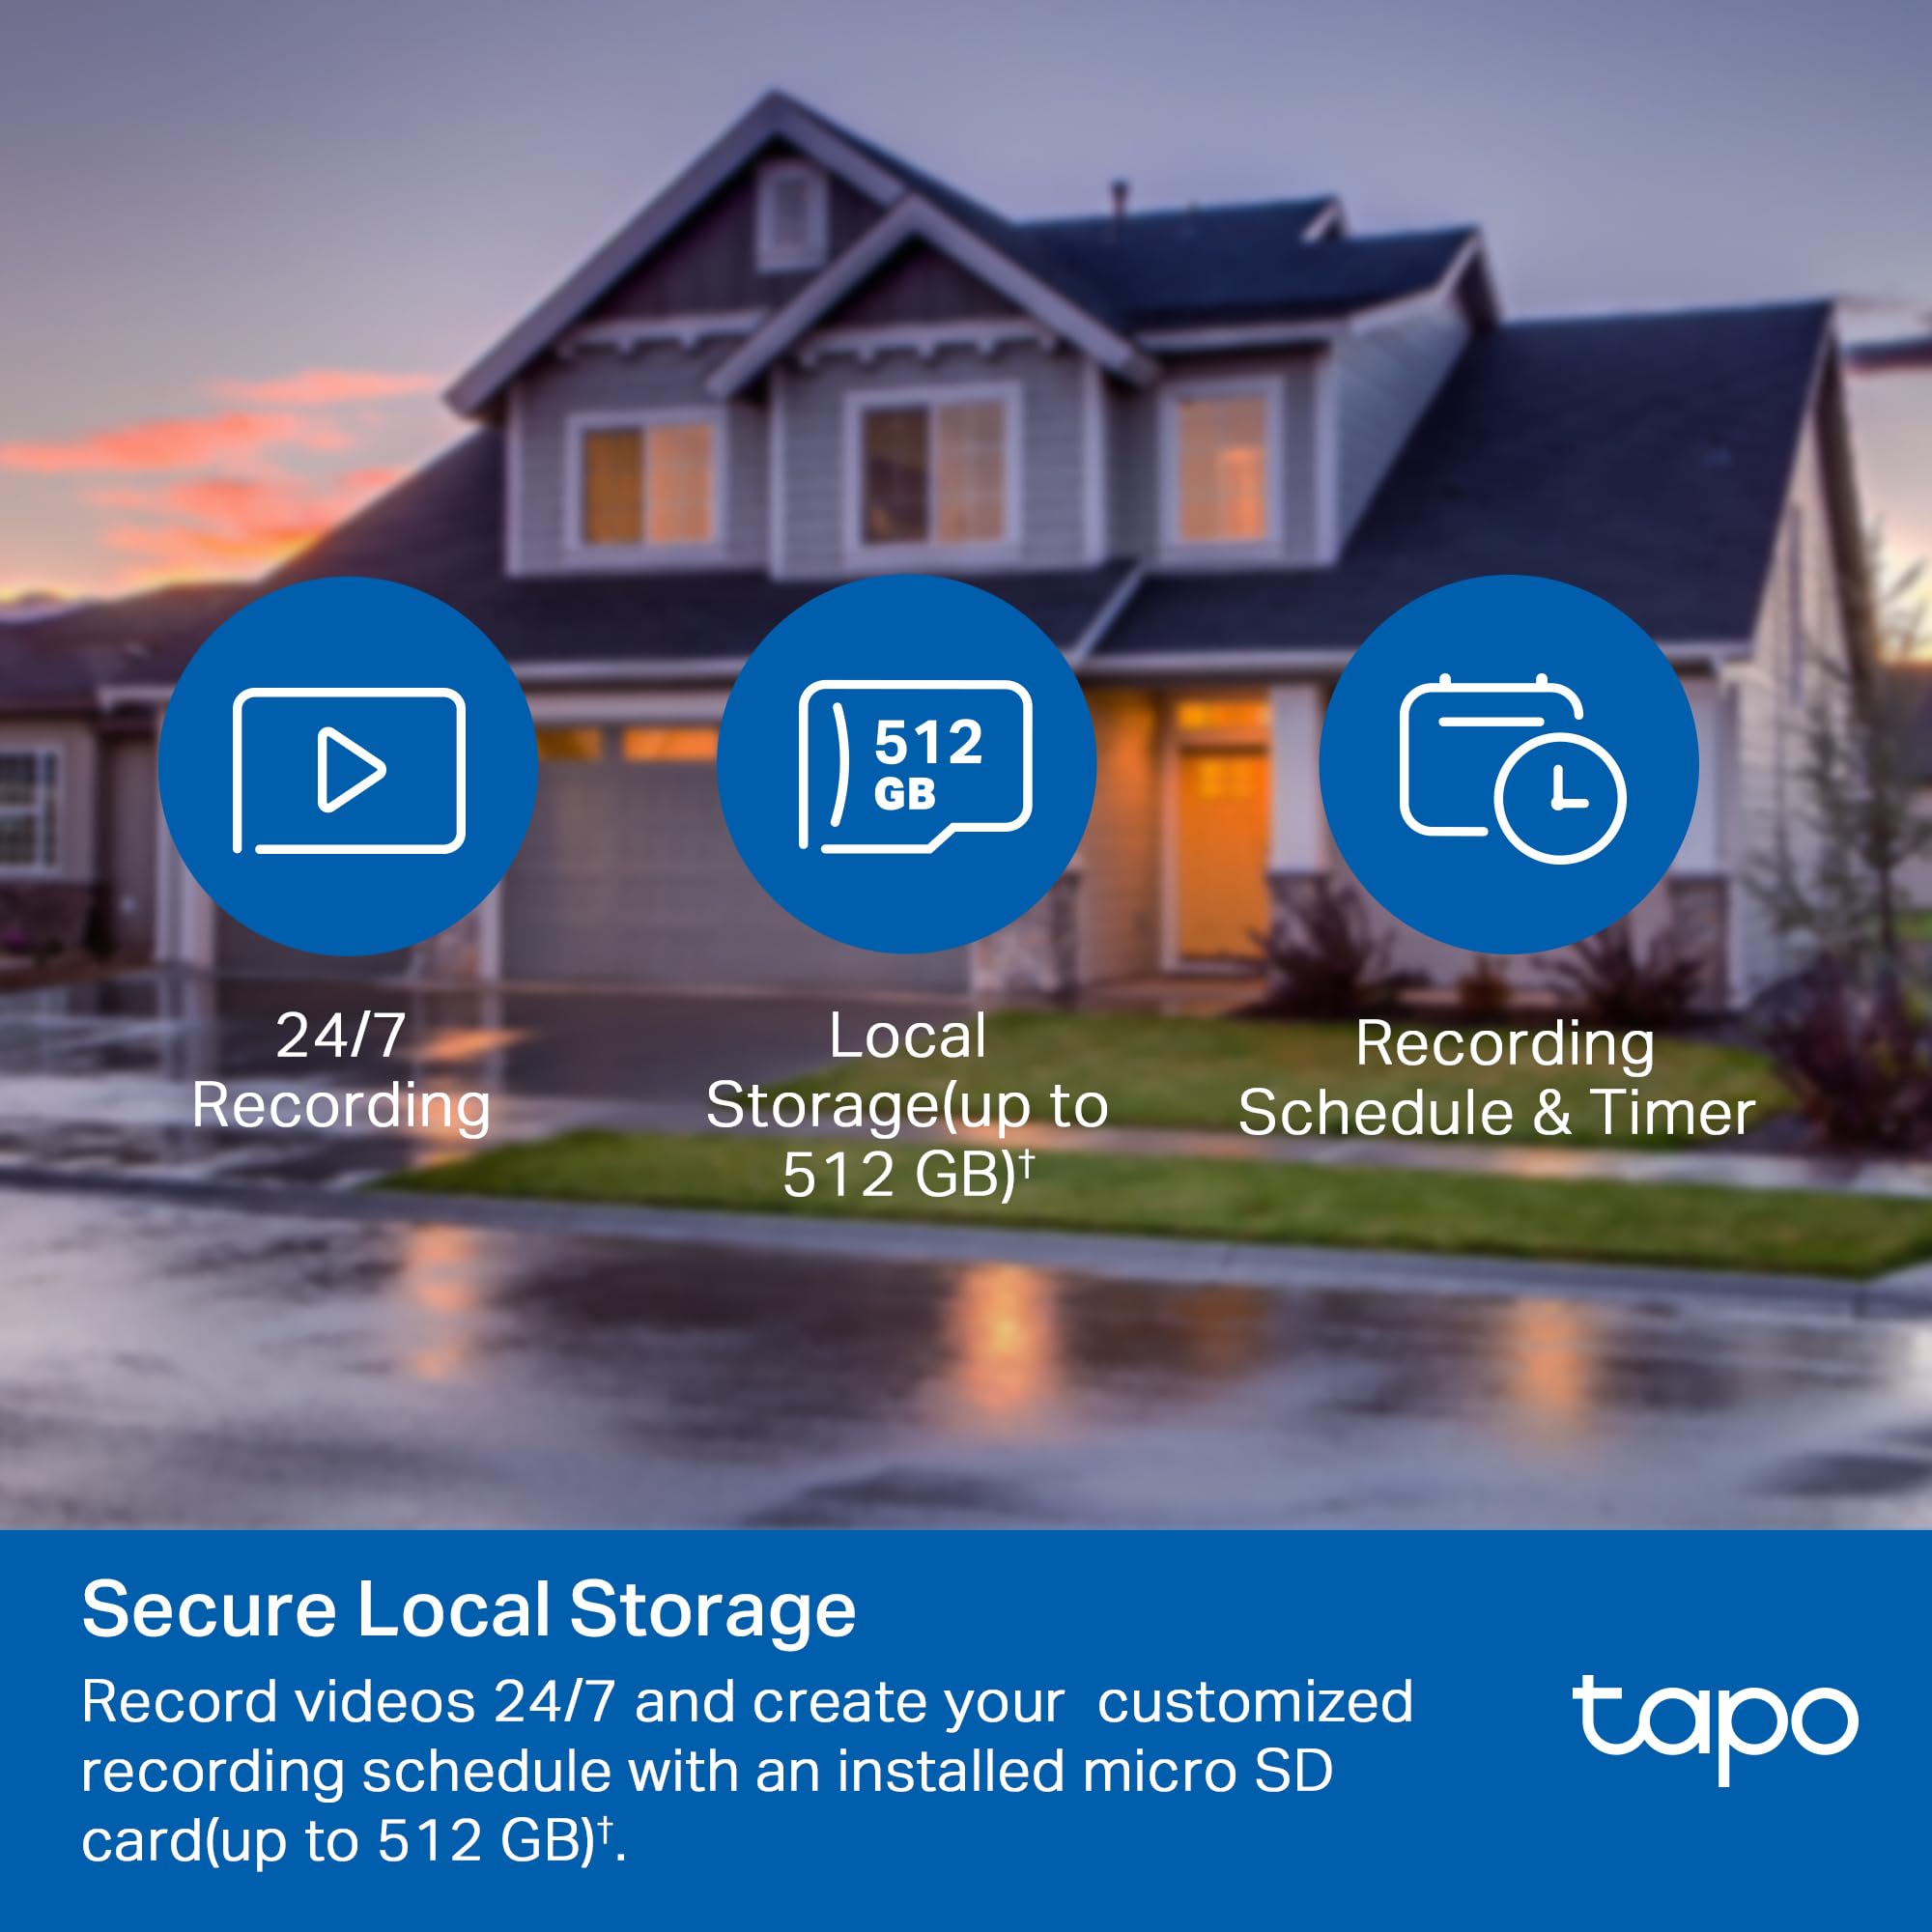 Tapo 1080P Outdoor Wired Pan/Tilt Security Wi-Fi Camera, 360° View, Motion Tracking, Works with Alexa & Google Home, Night Vision, Free AI Detection, Cloud & SD Card Storage(up to 512GB), Tapo C500